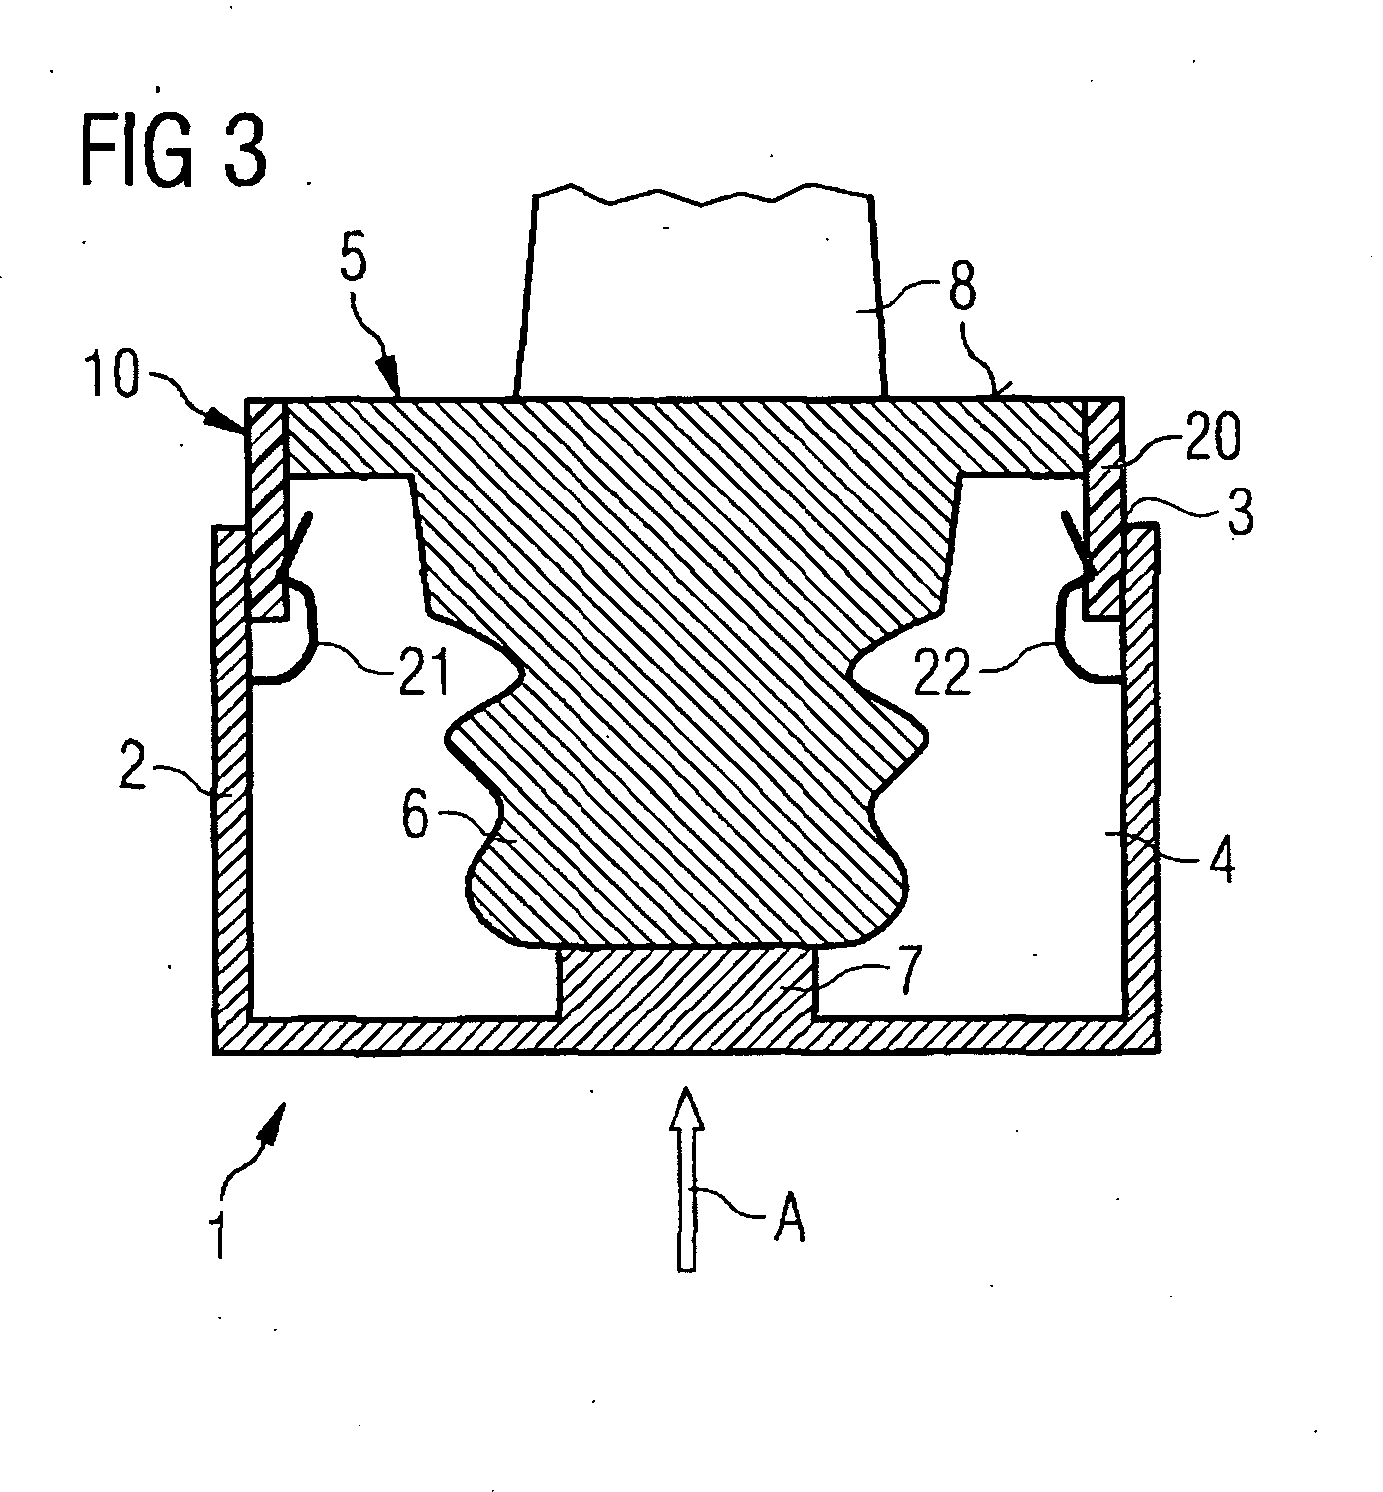 Method of preparing turbine blades for spray coating and mounting for fixing such a turbine blade